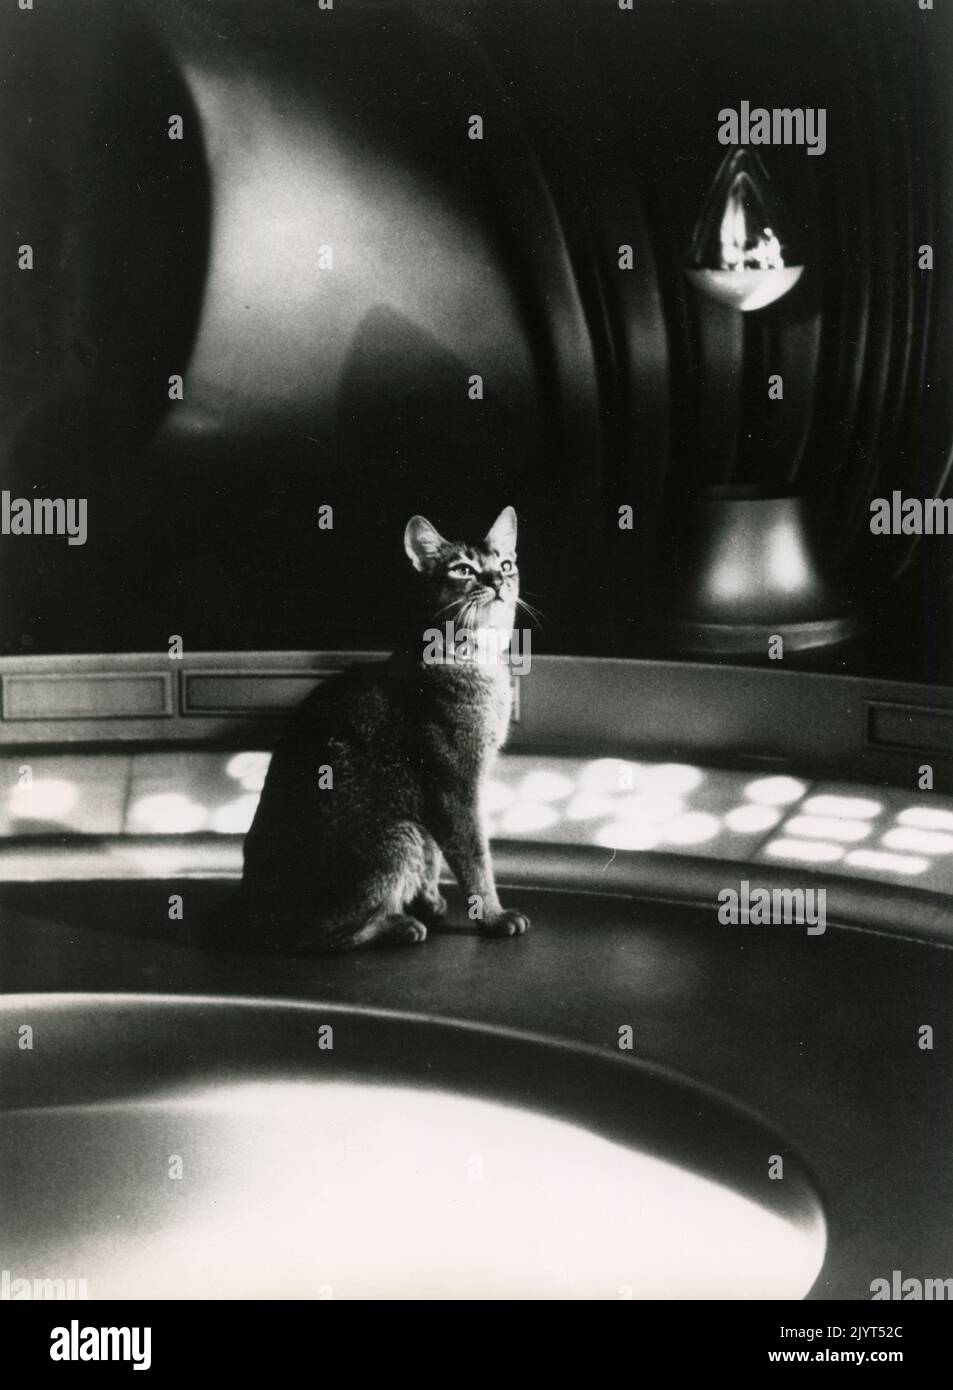 The cat in the movie The Cat from Outer Space, USA 1978 Stock Photo